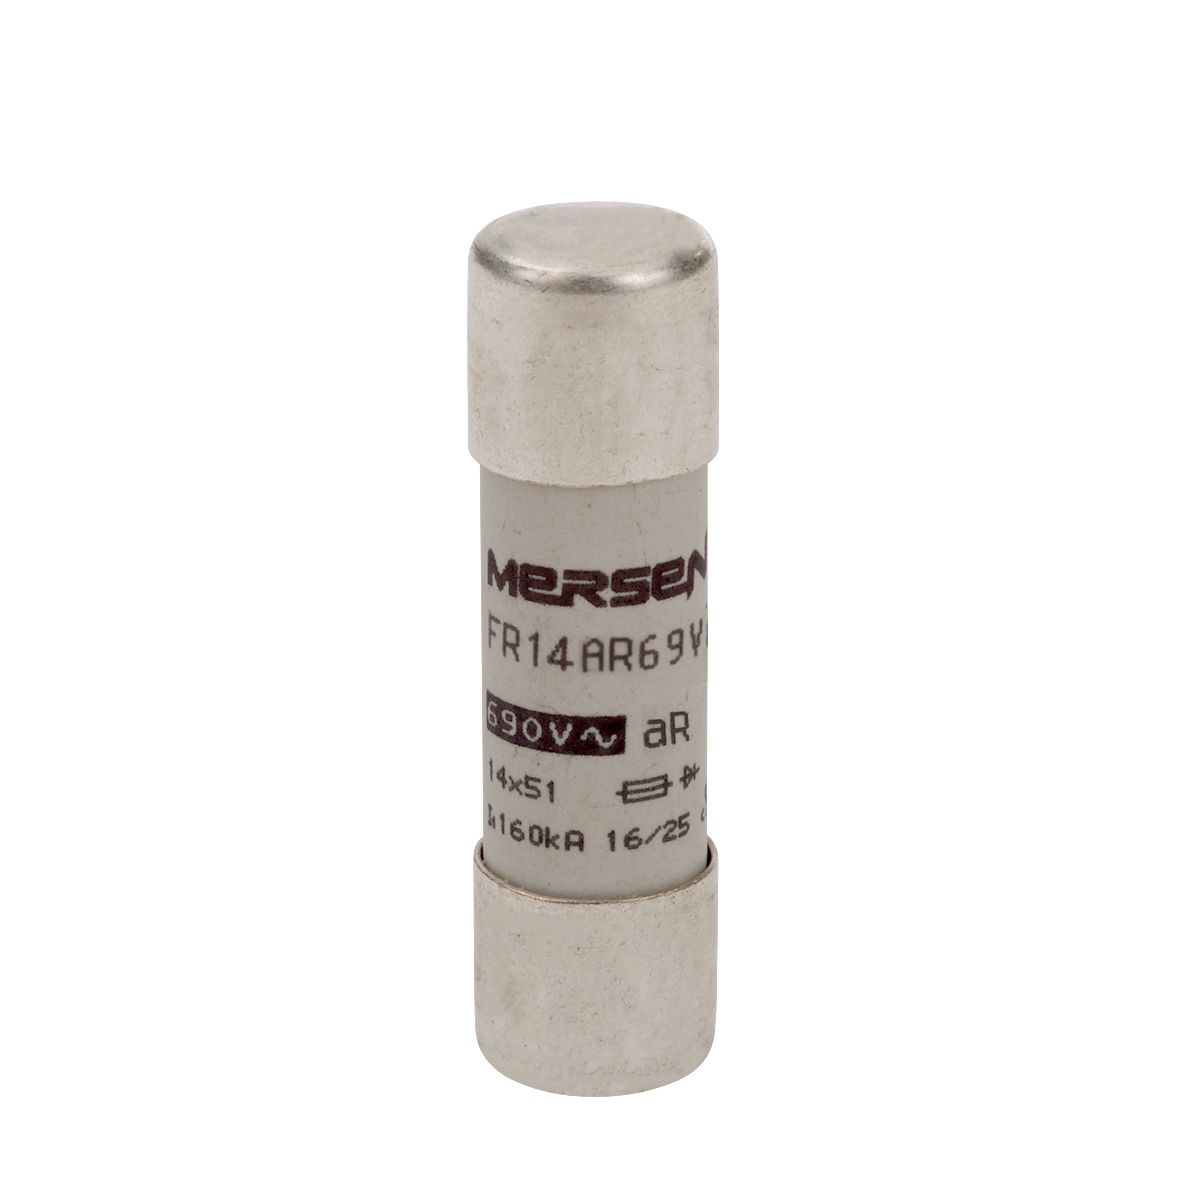 Q1027332 - Cylindrical fuse-link aR 690VAC 14x51, 32A, without indicator